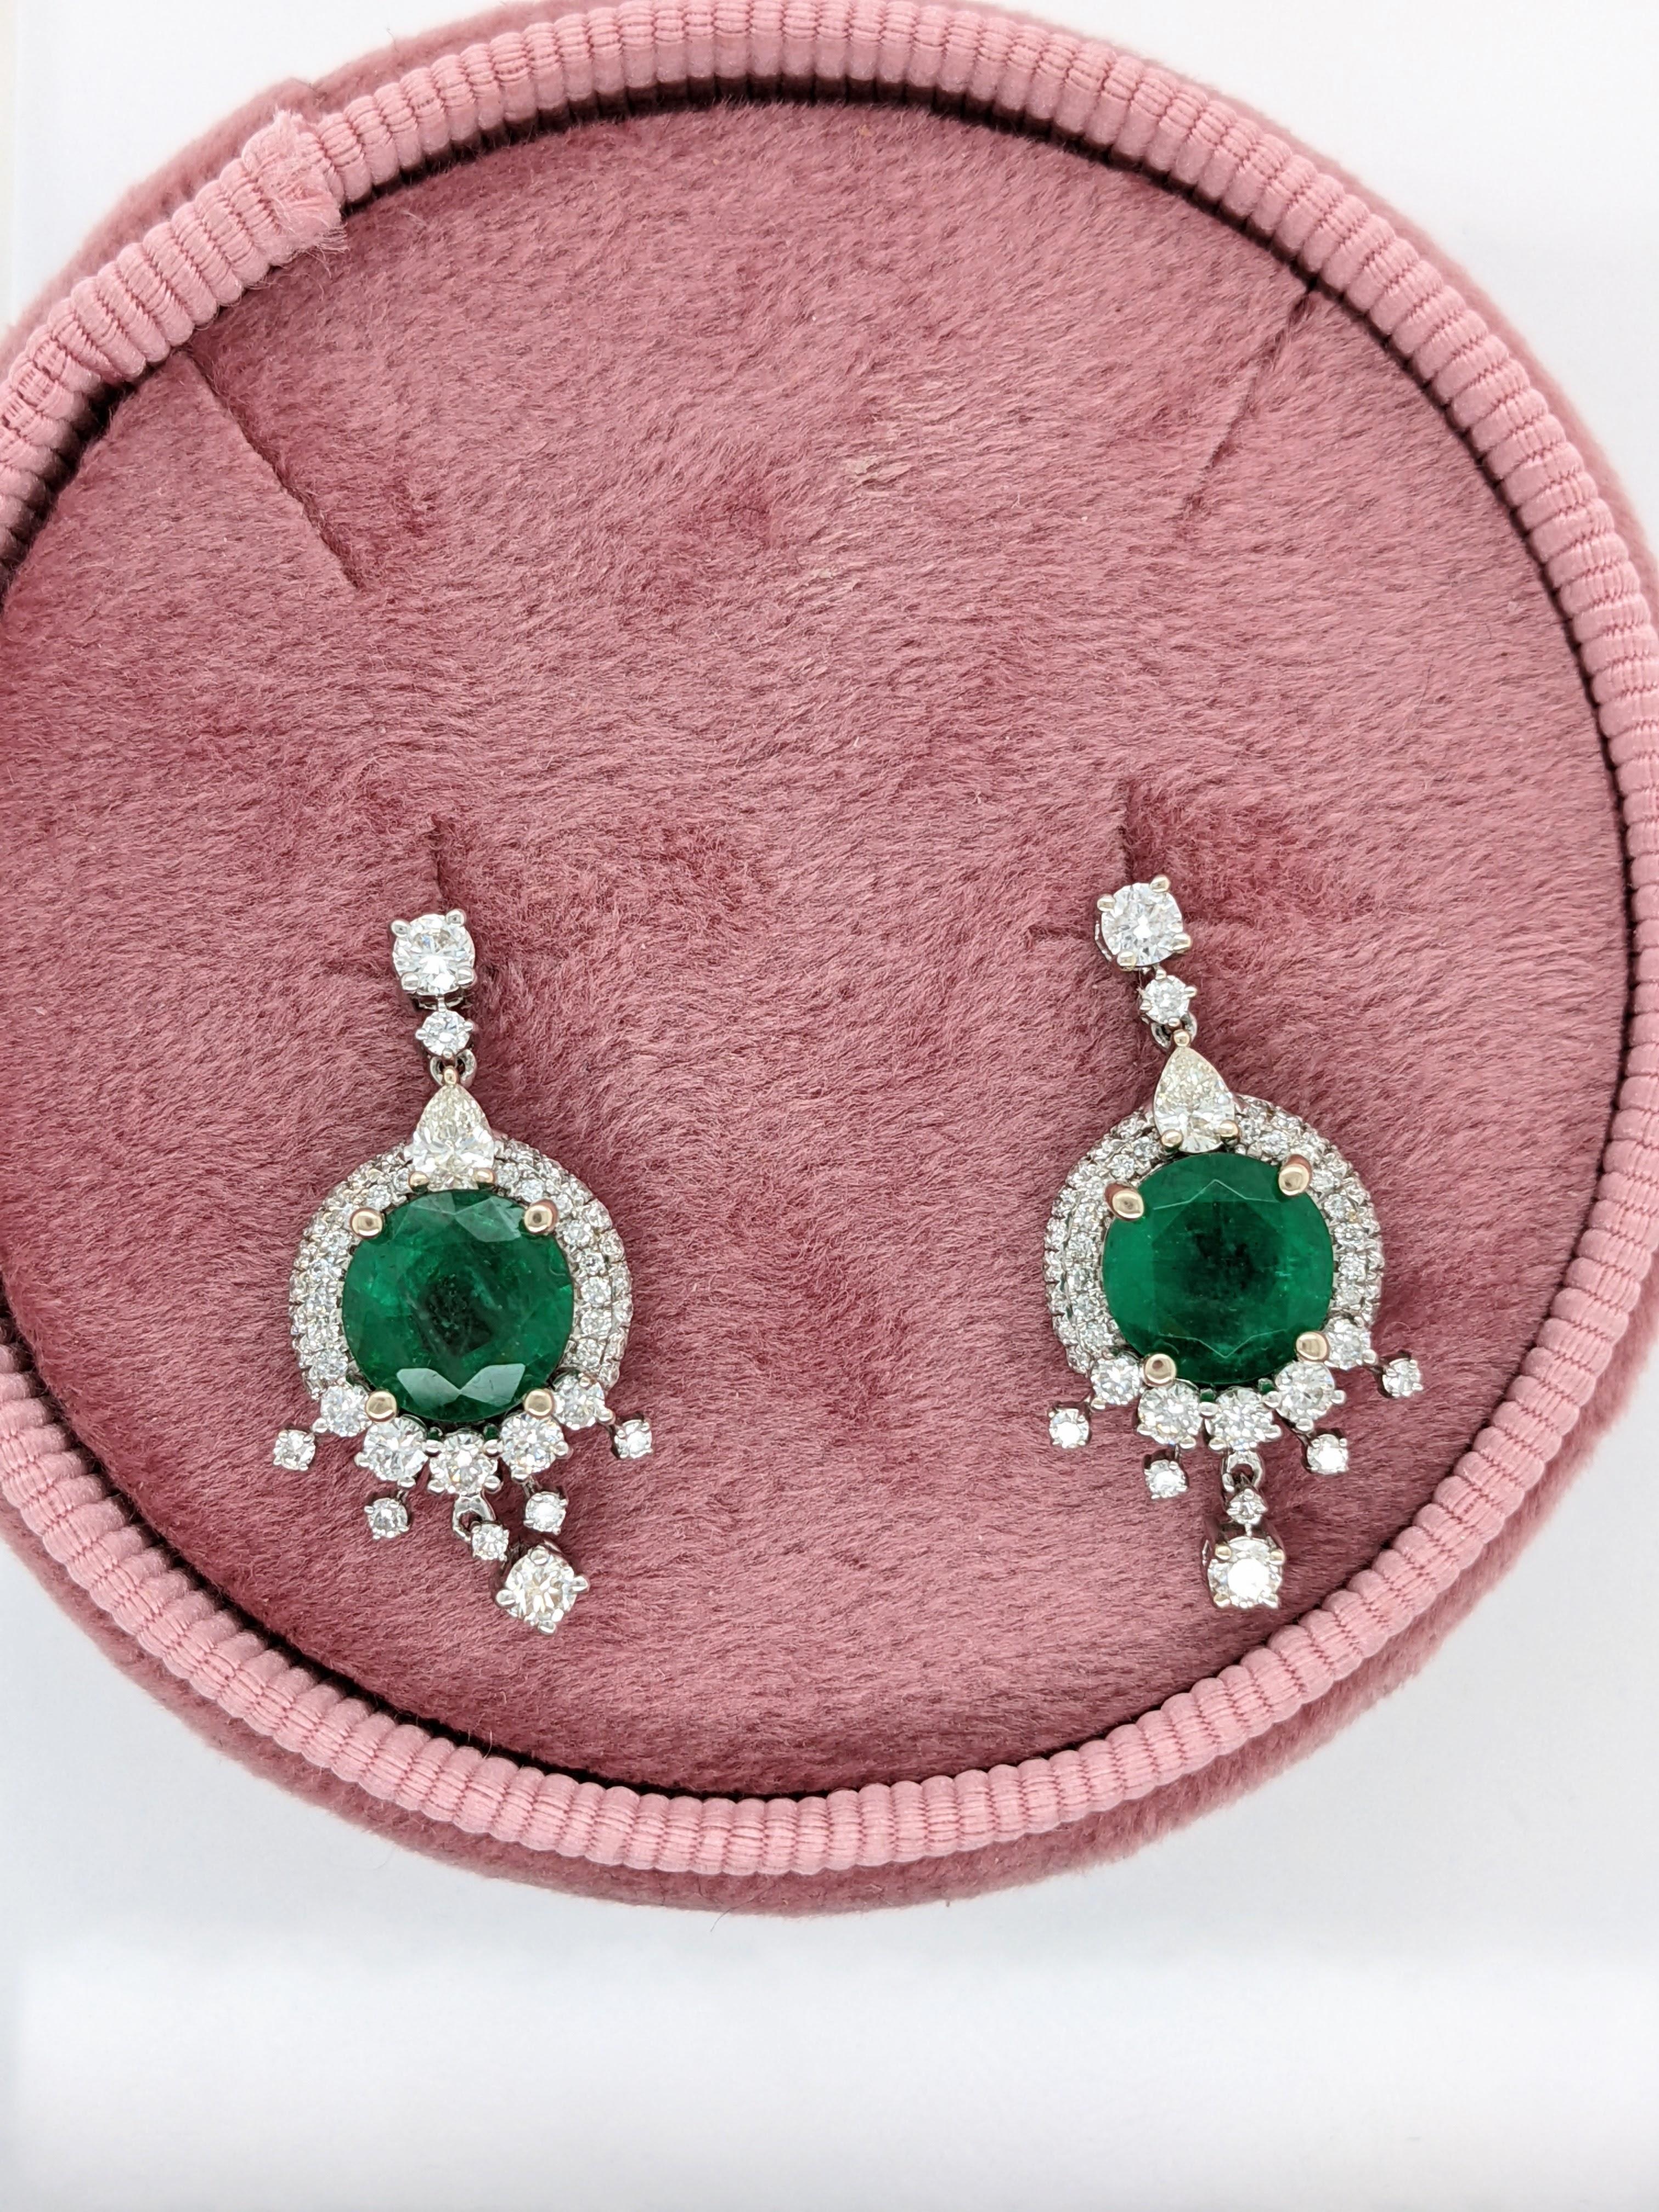 Modern Zambian Emerald Drop Earrings in 14k Solid White Gold with Natural Diamonds For Sale